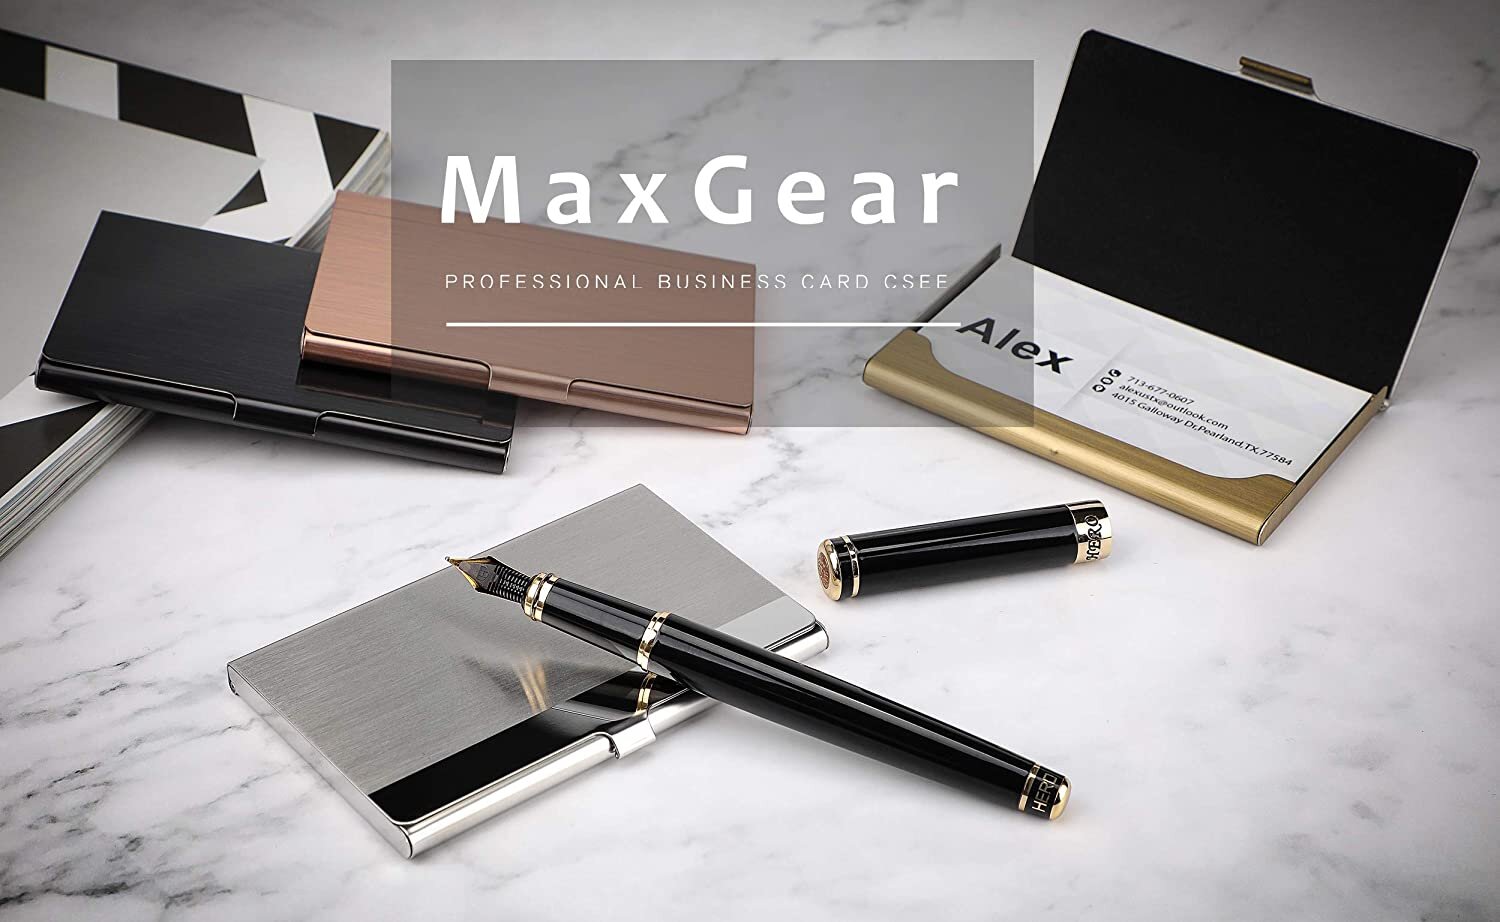 3.7 x 2.3 x 0.3 inches Gold Stainless Steel MaxGear Professional Metal Business Card Holder Pocket Business Card Case Slim Business Card Wallet Business Card Carrier for Men & Women 